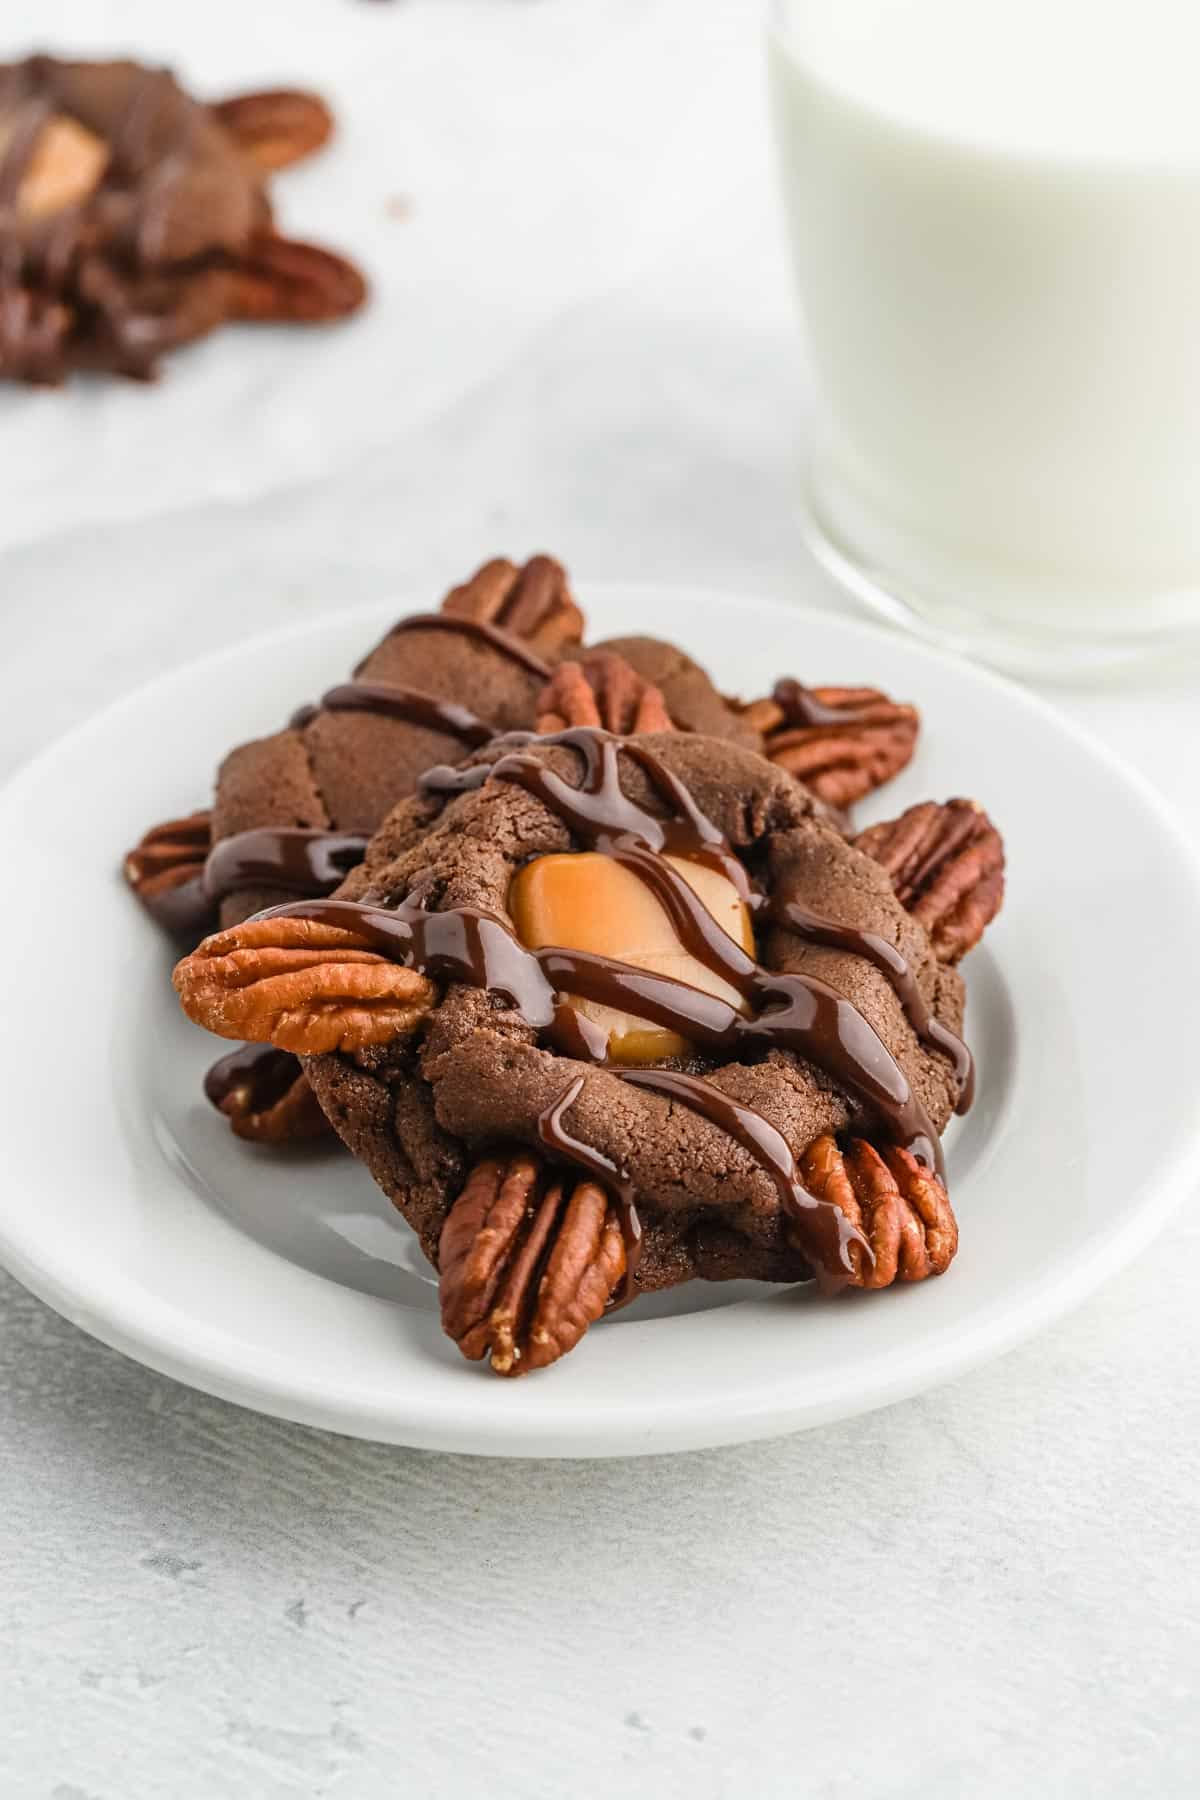 Chocolate turtle cookies on a small plate with a glass of milk.